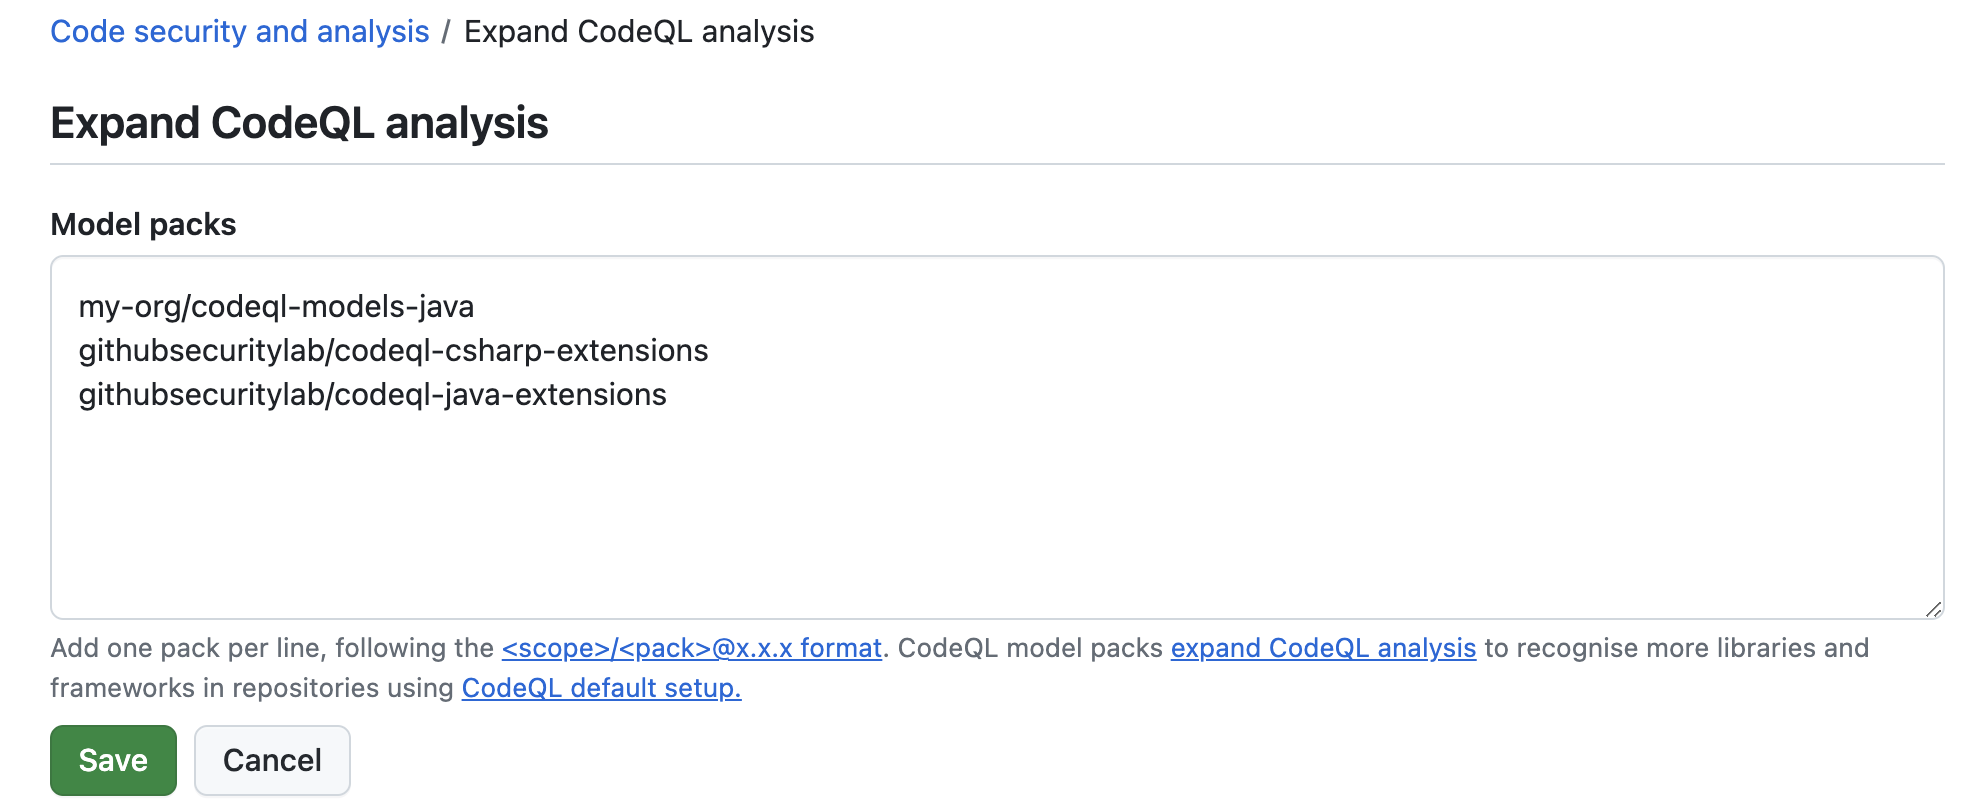 Configuring CodeQL model packs in the organisation code security and analysis settings